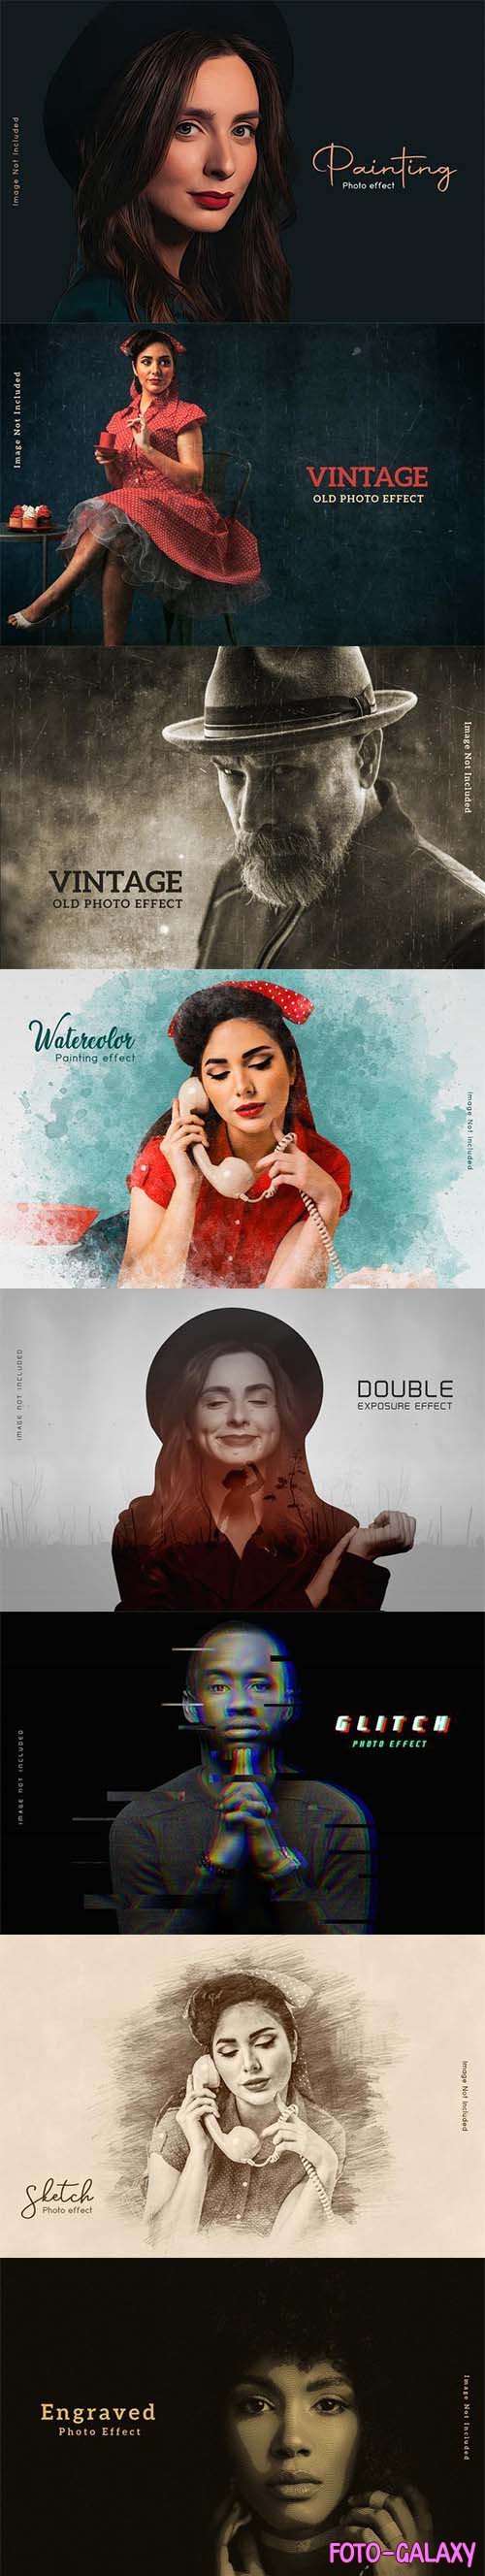 Photo Effect Template - Glitch, Vintage, Painting, Engraved, Double Exposure, Sketch